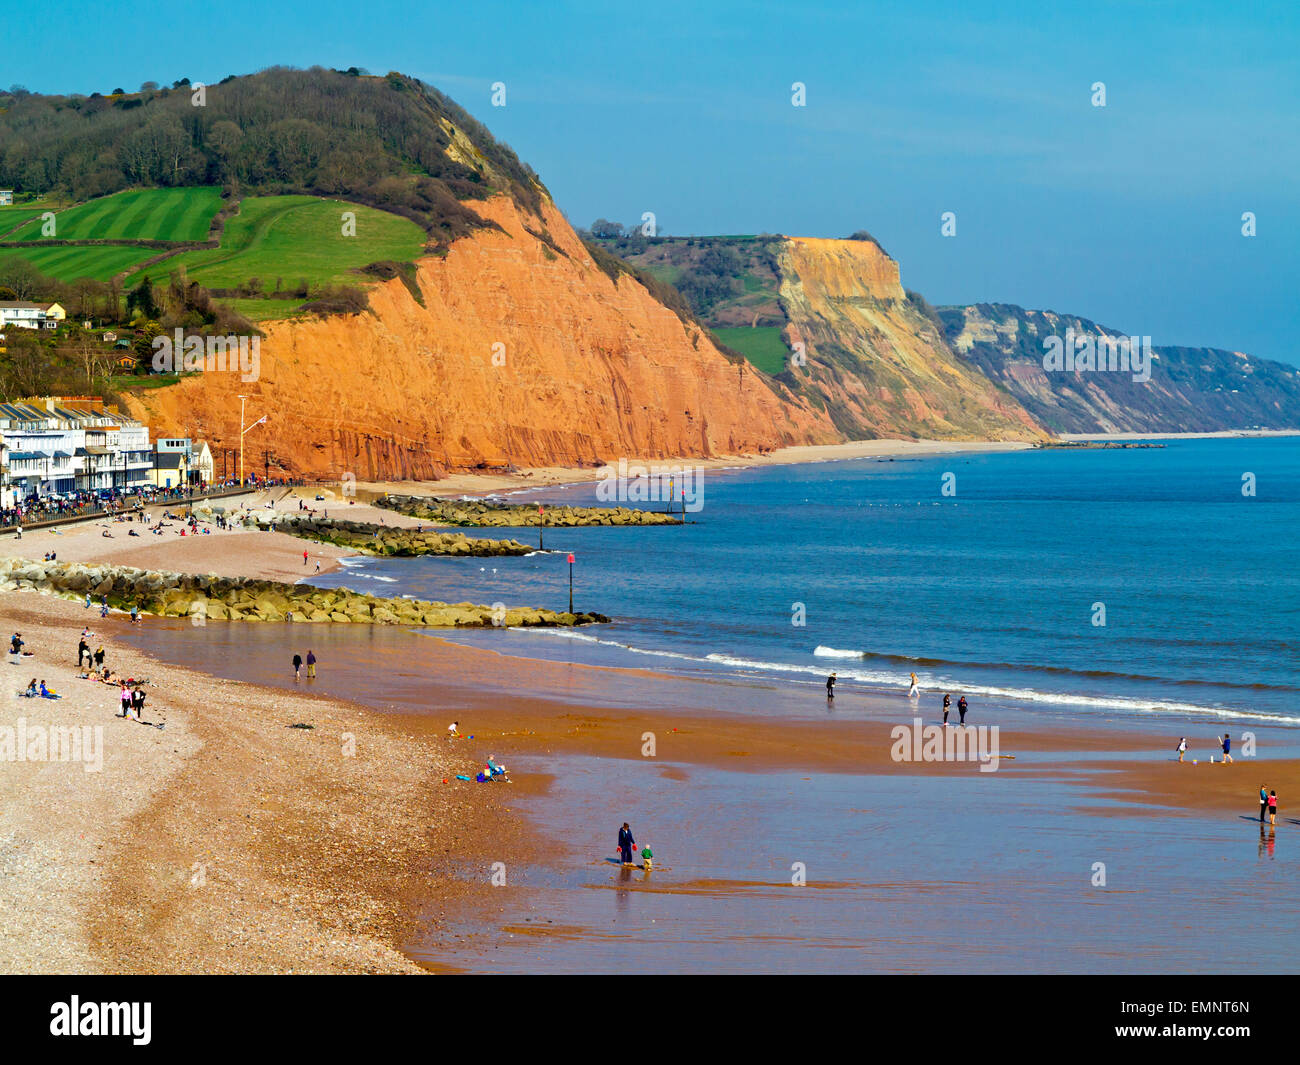 View looking east along the beach at Sidmouth South Devon England UK with the red sandstone cliffs of the Jurassic Coast beyond Stock Photo